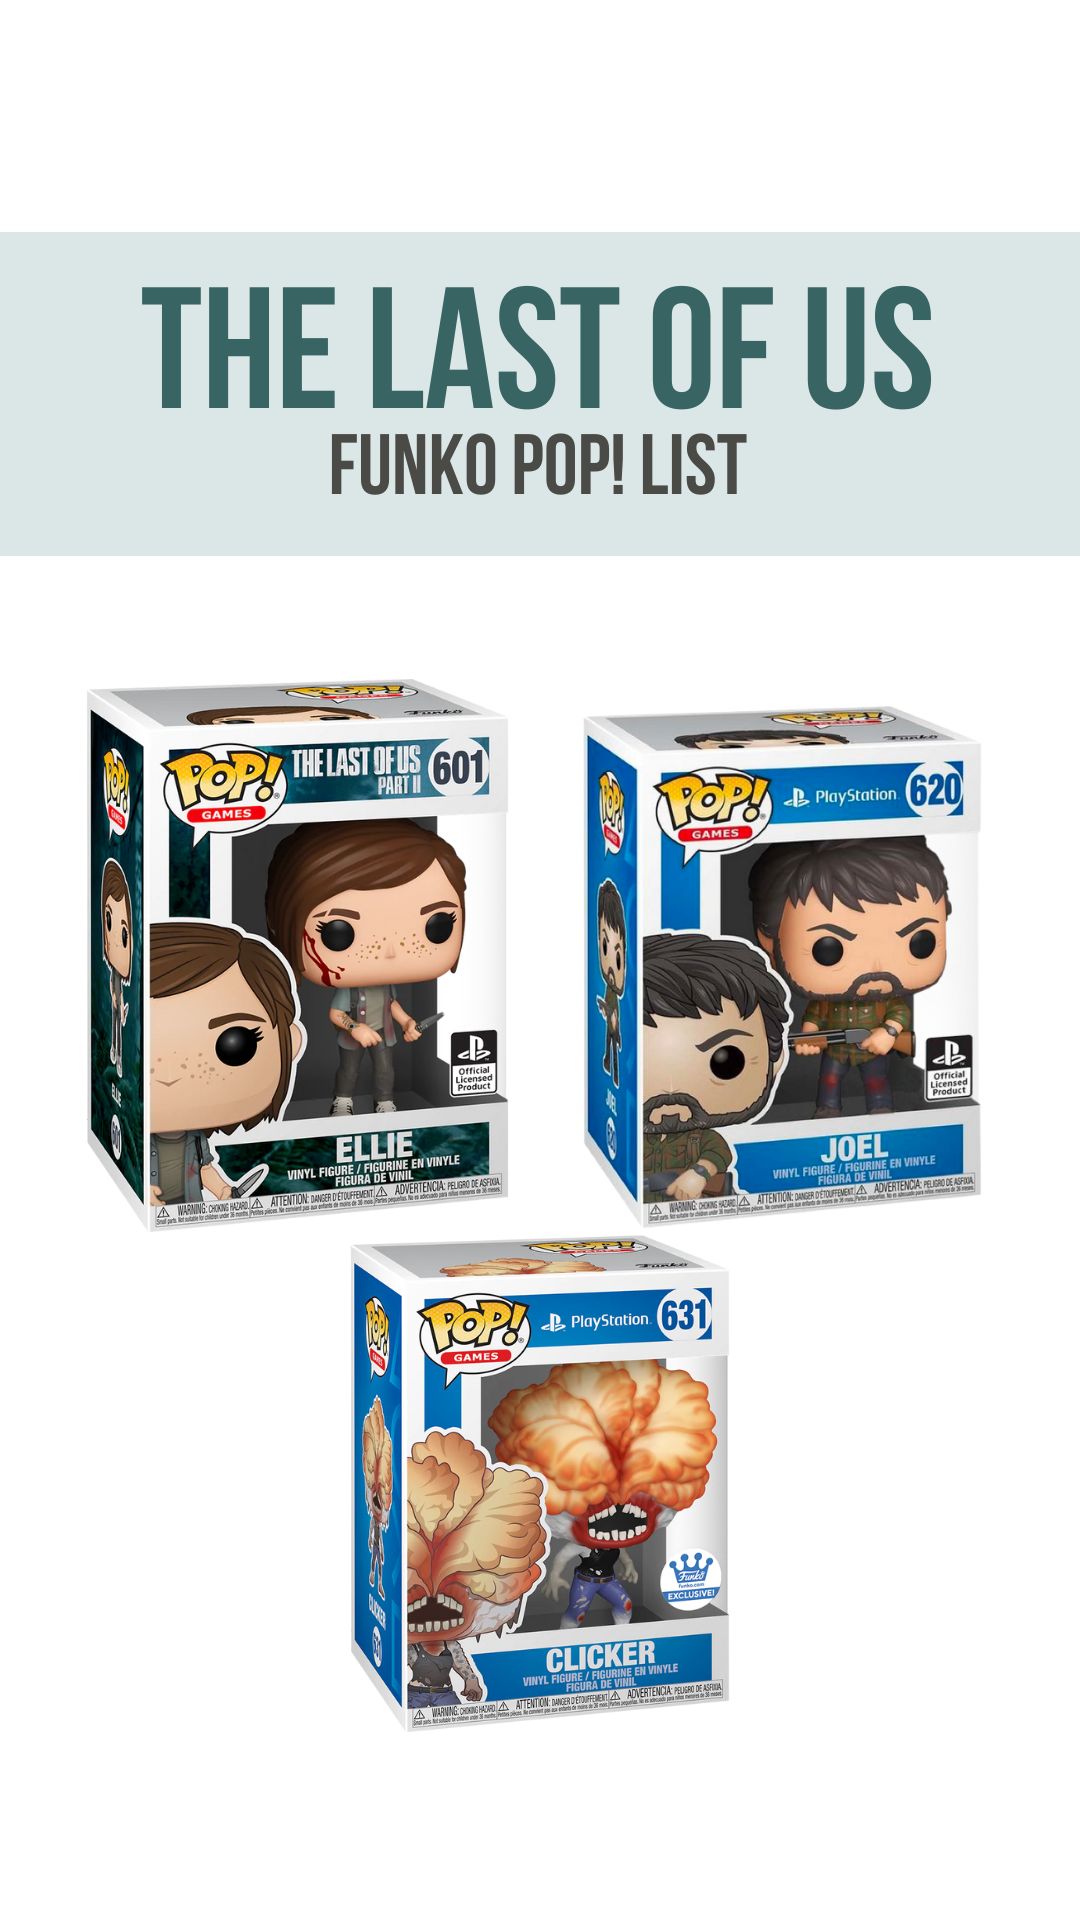 The Last of Us Funko Pop List of Figures with Boxes